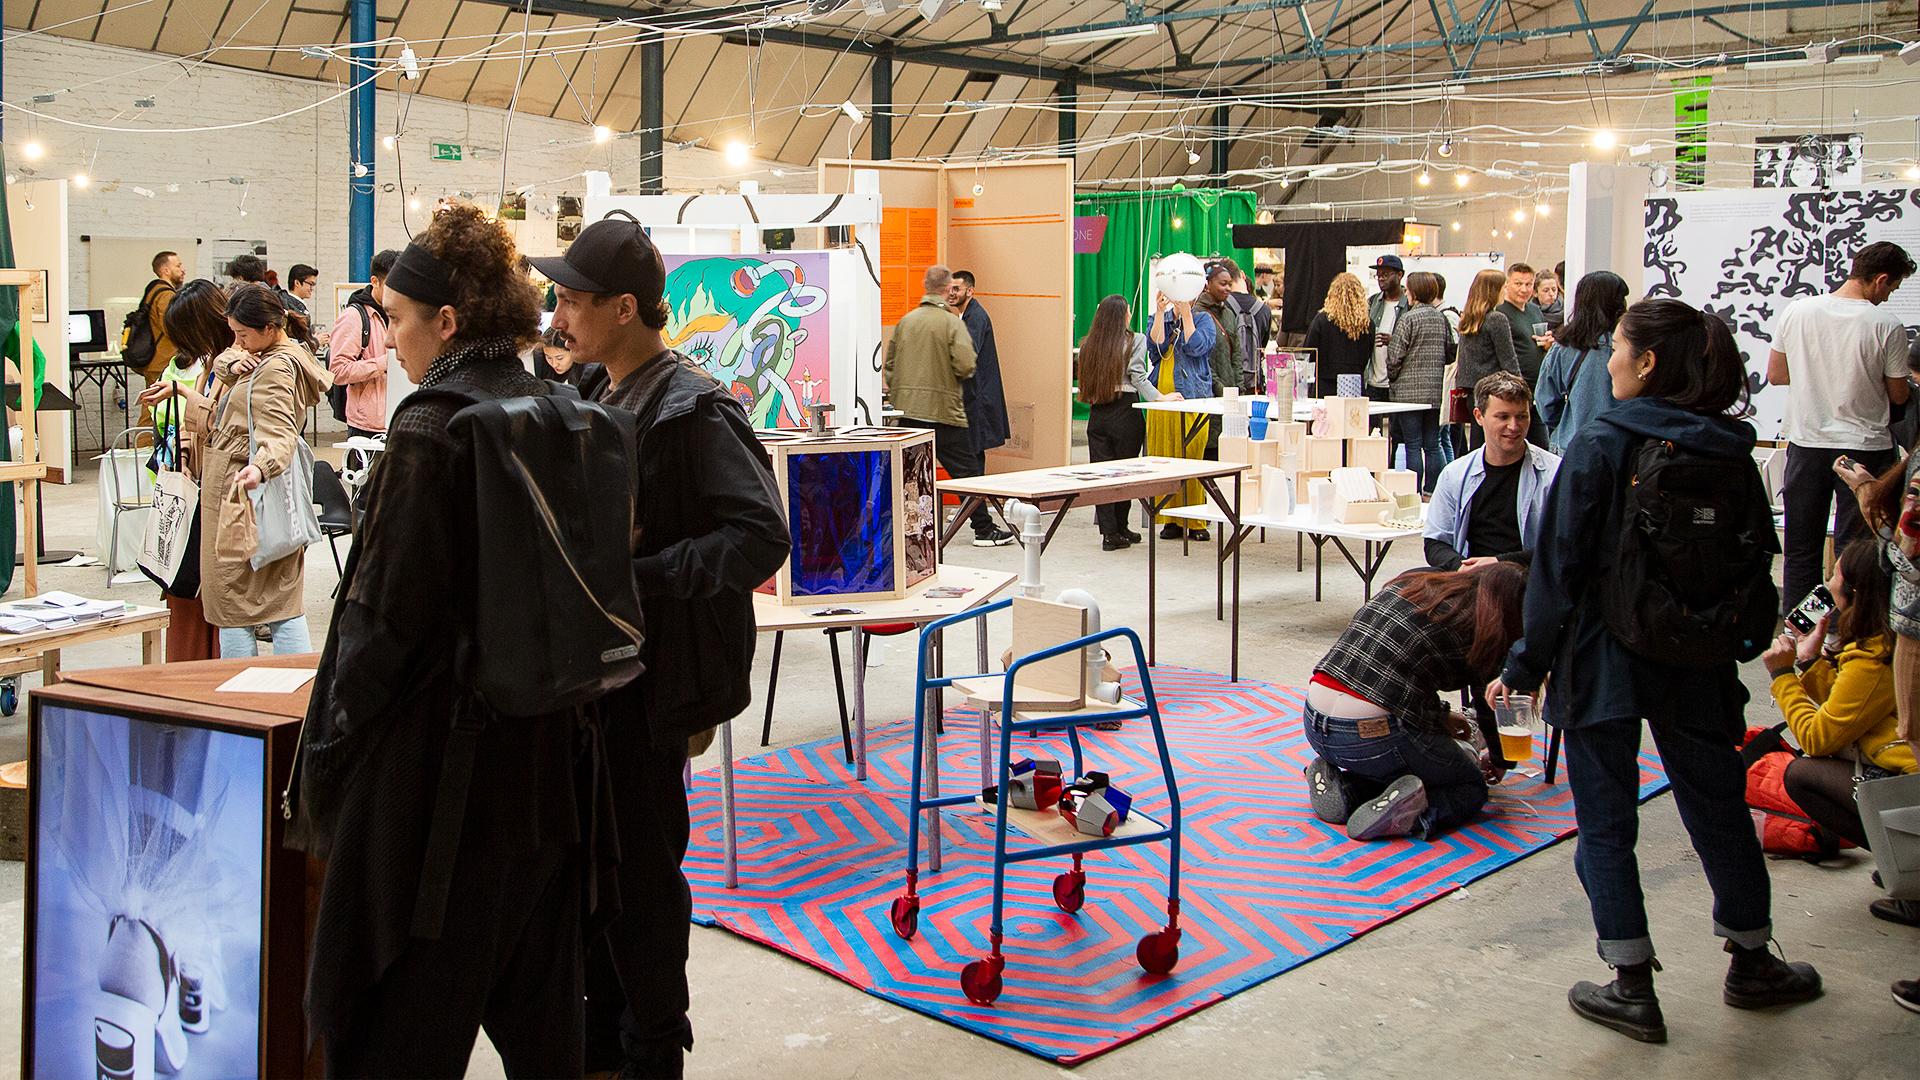 An exhibition space is filled with colourful work by BA Design students